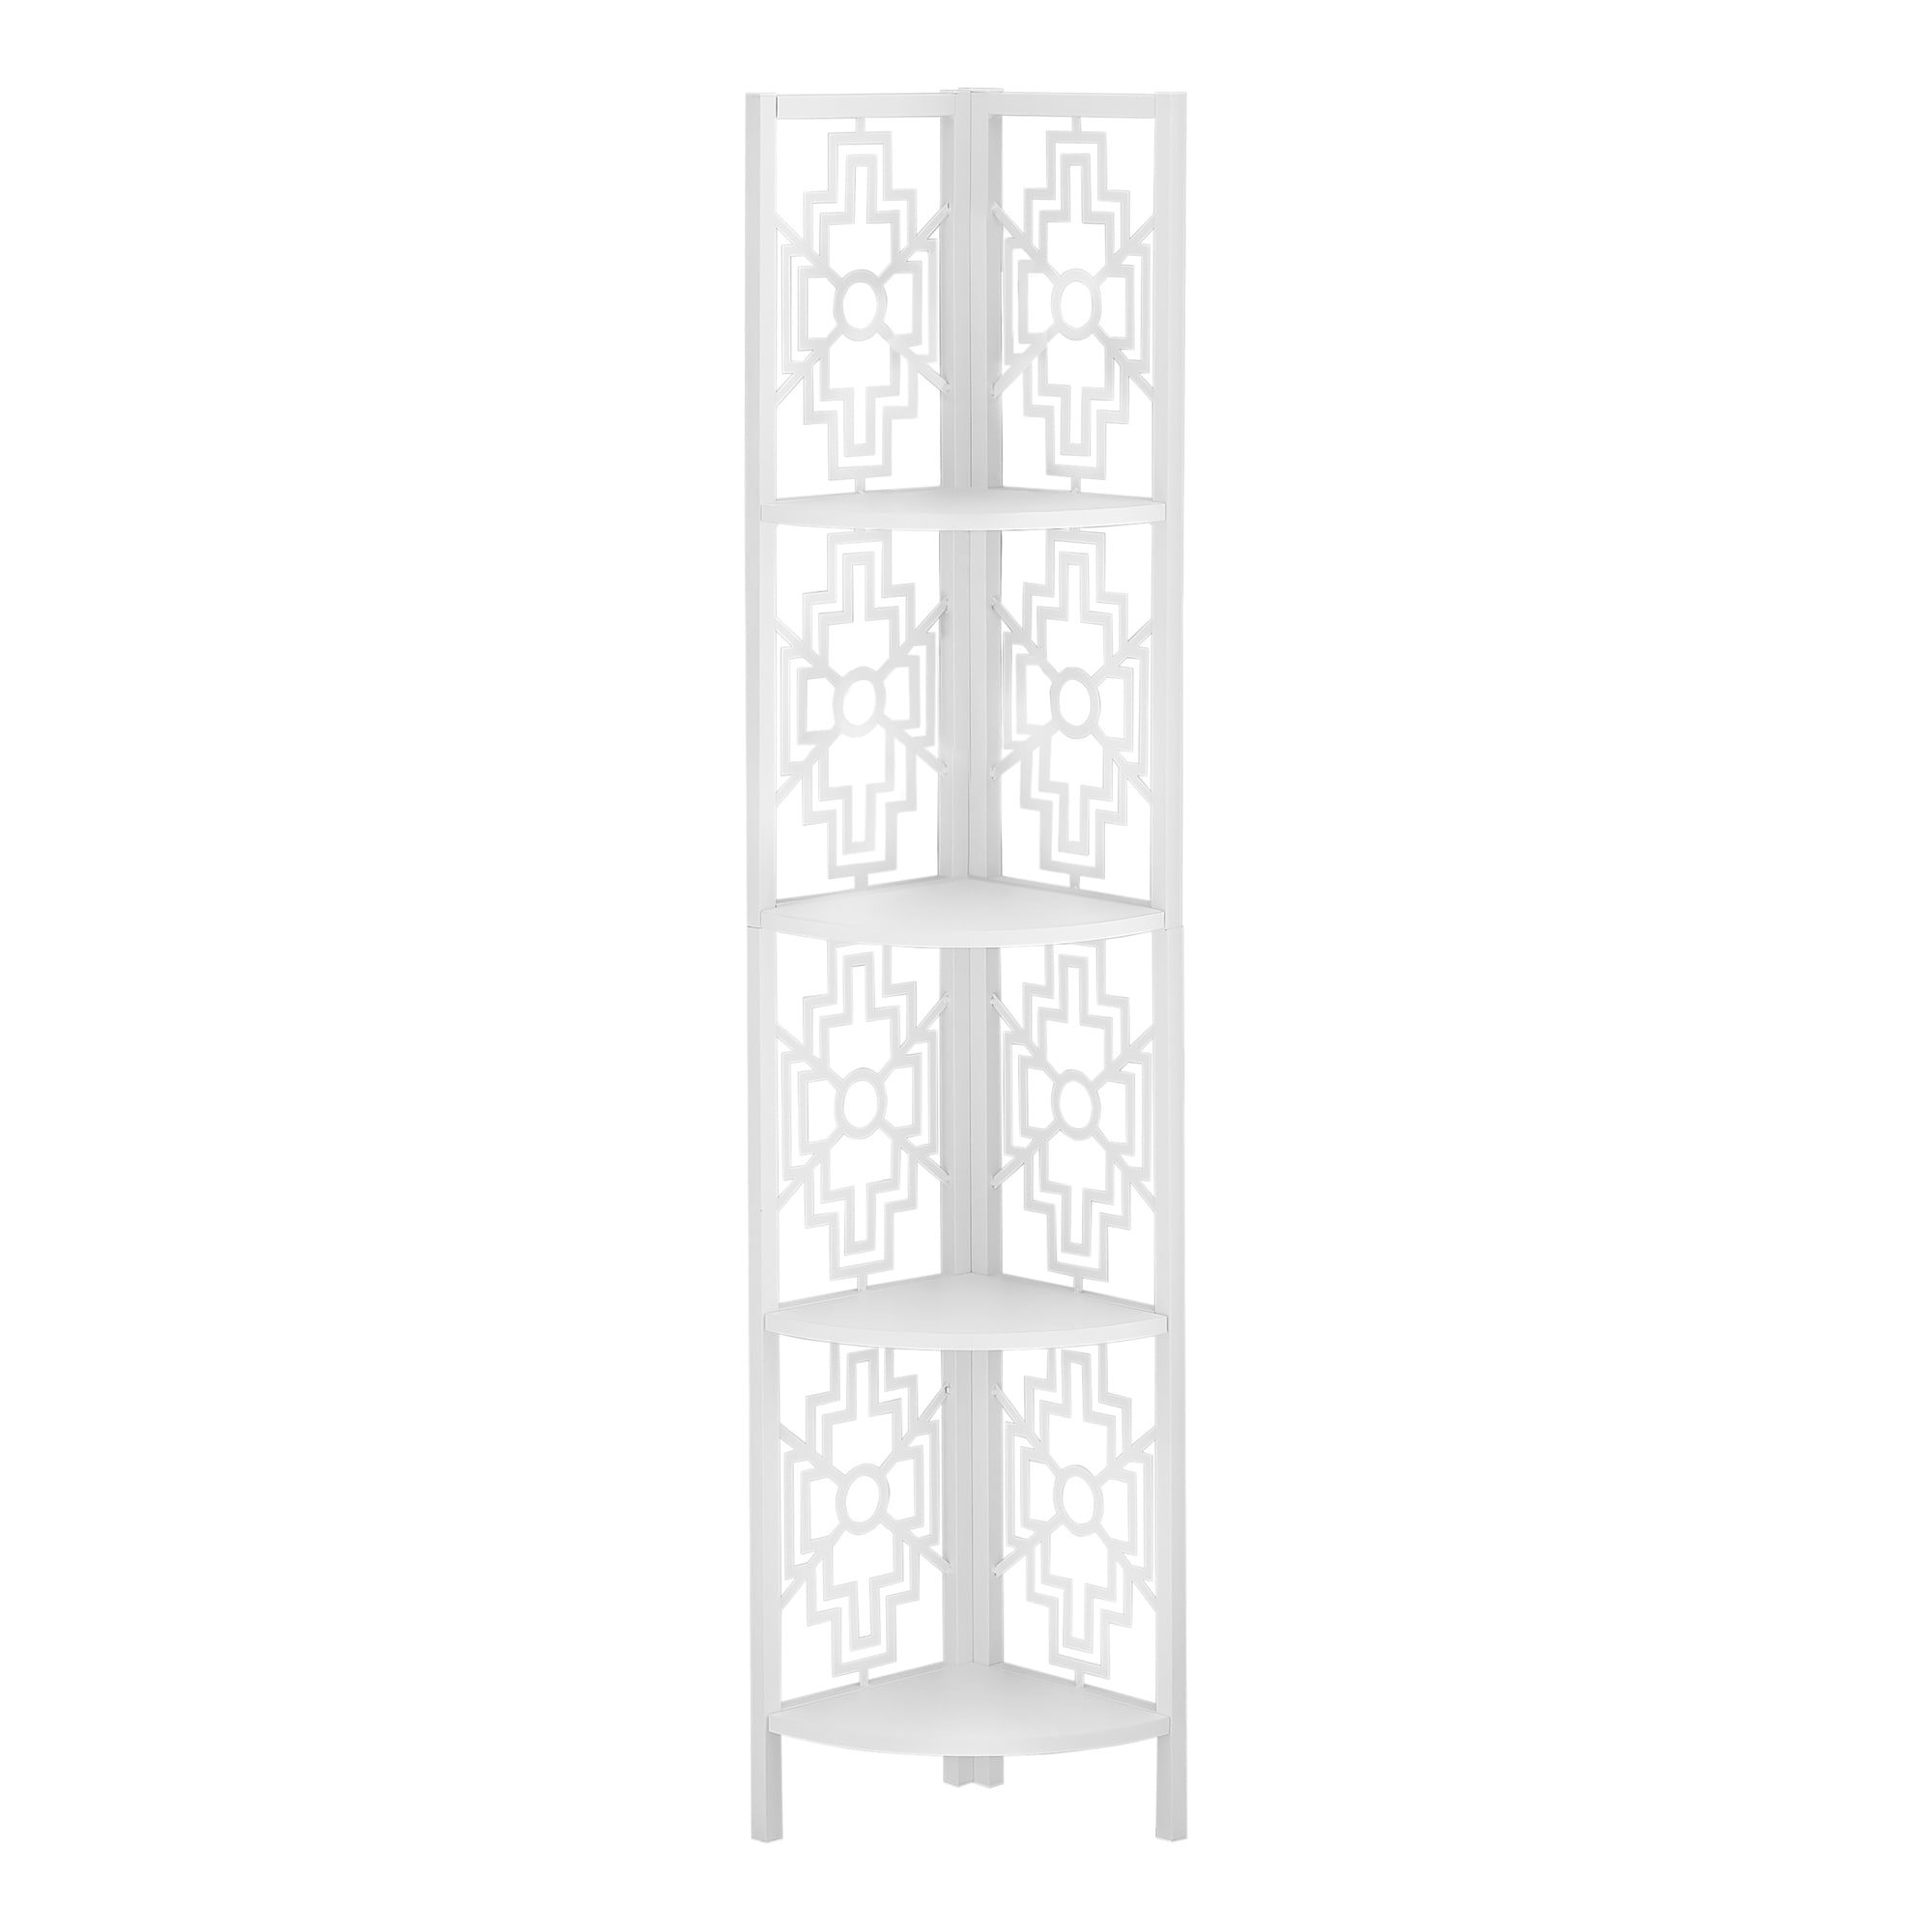 https://ak1.ostkcdn.com/images/products/is/images/direct/ad0e7f4a319e8f237682a1f79c02177f1a759d82/Bookcase--62%22H.jpg